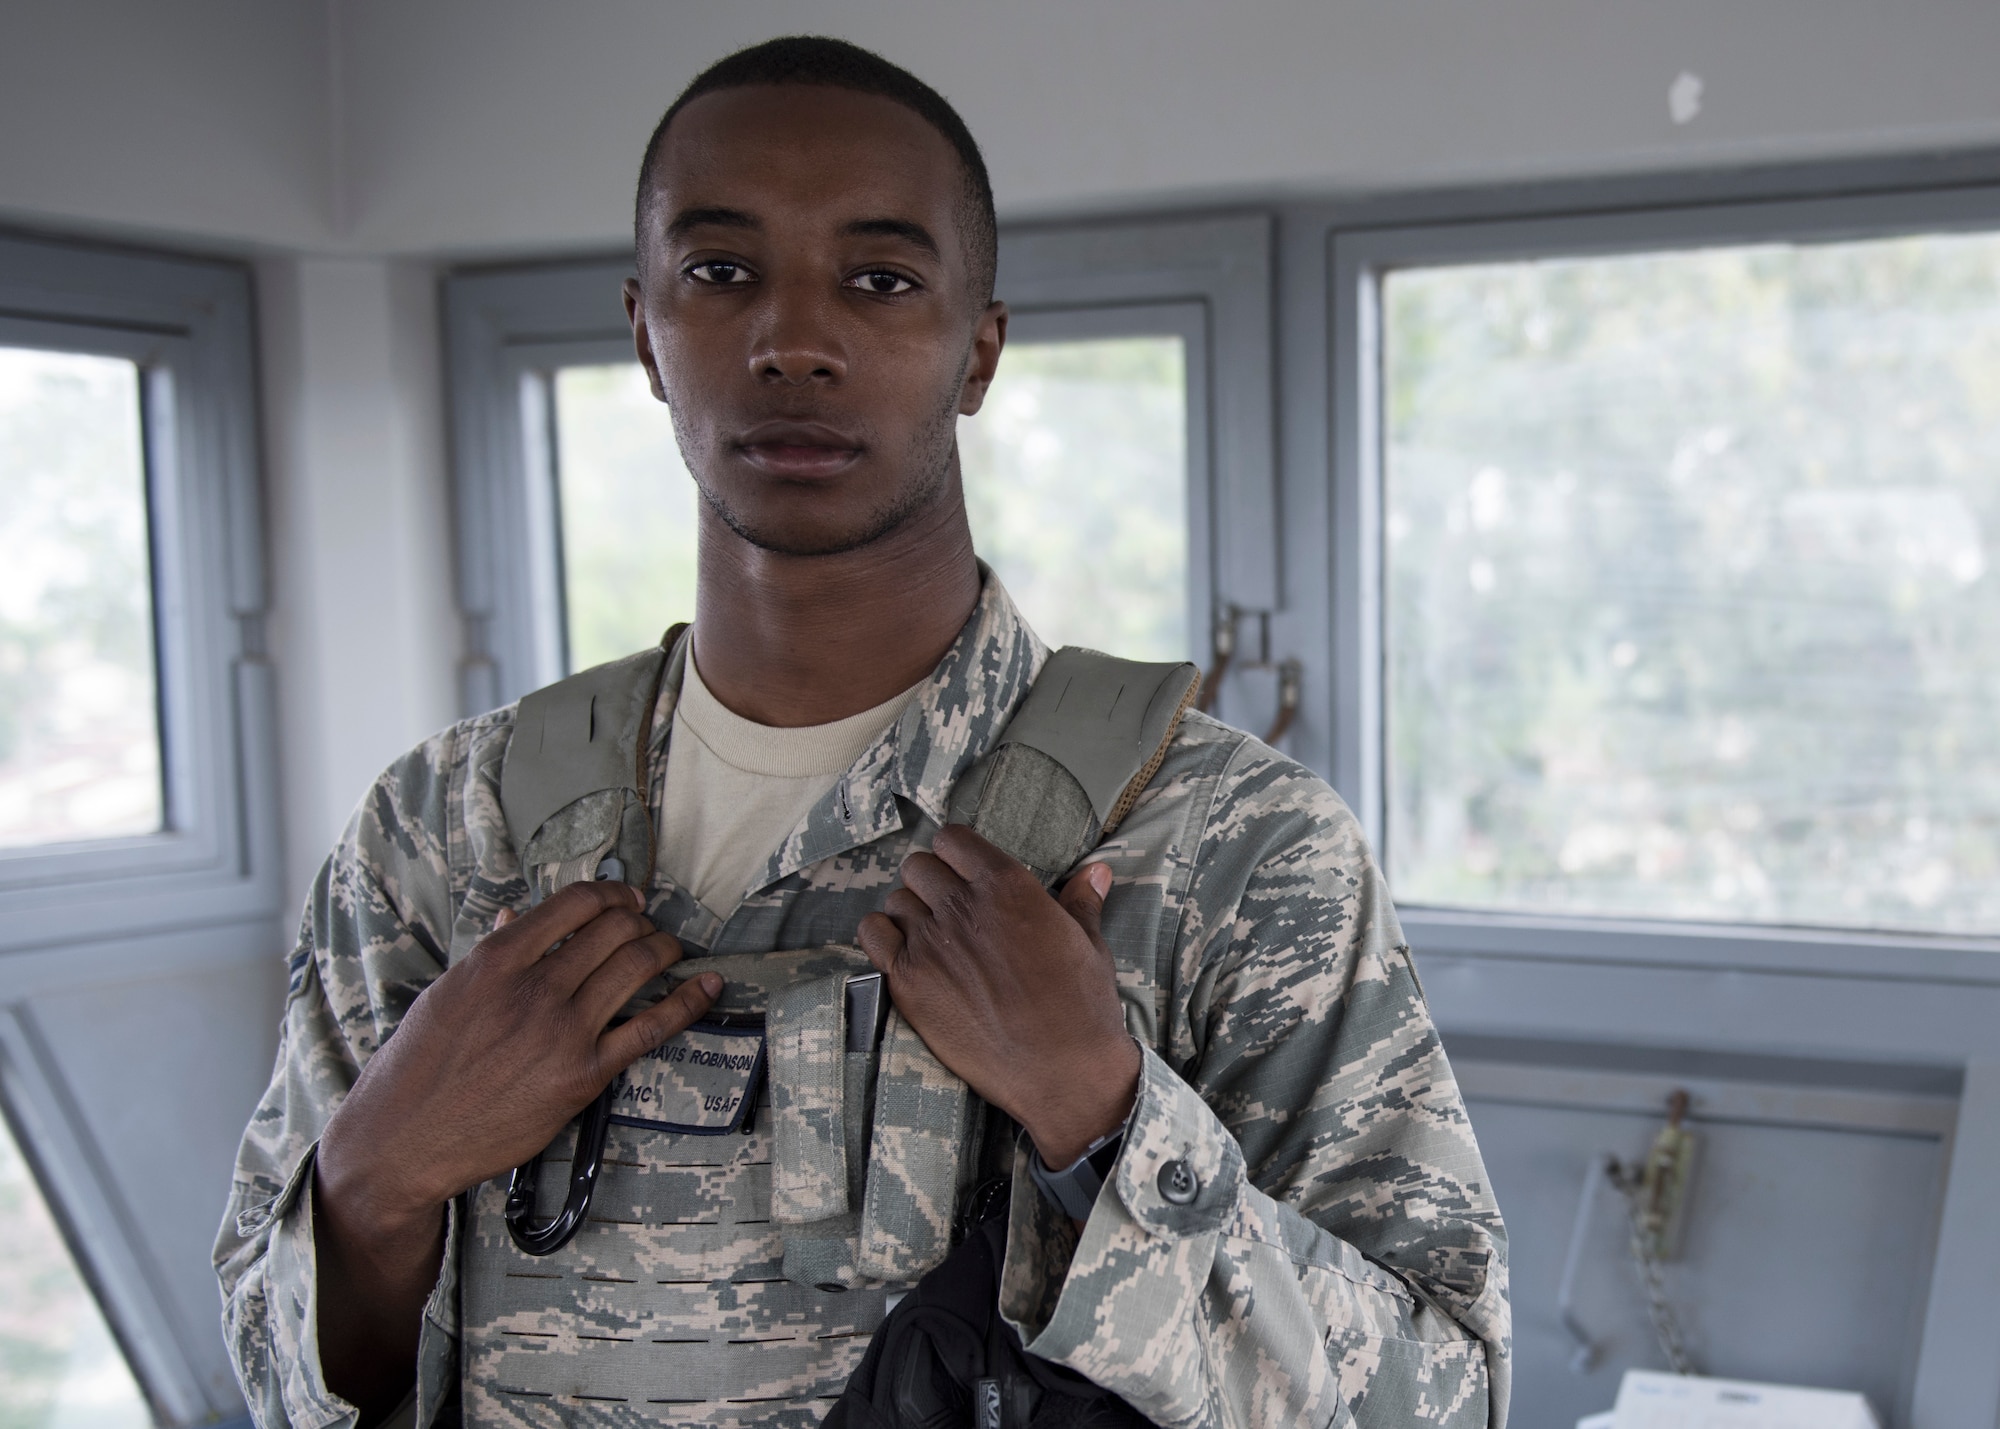 U.S. Air Force Airman 1st Class Chavis Robinson, a 39th Security Forces Squadron contingency member, poses for a photo in a watch tower at Incirlik Air Base, Turkey, June 21, 2018.